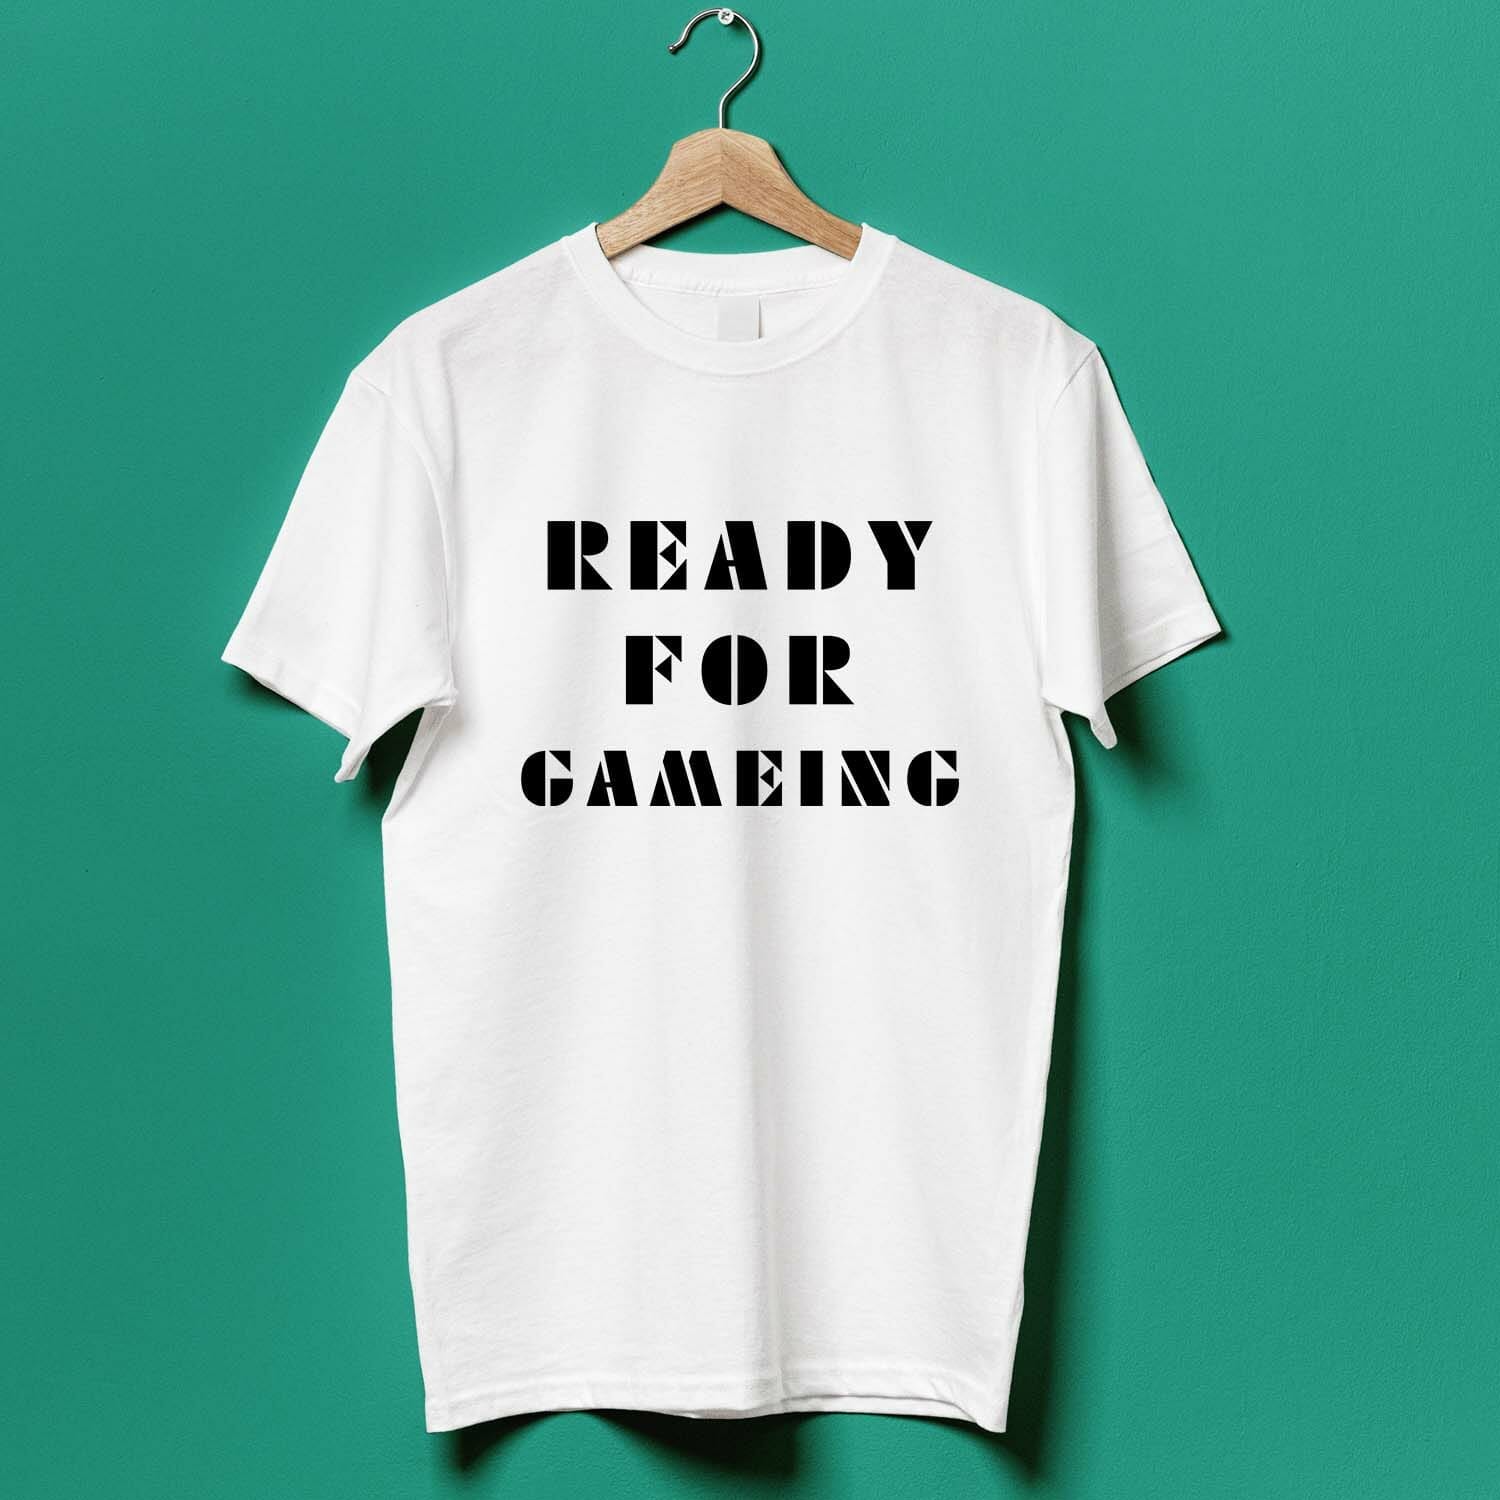 Ready for Gaming T-shirt Design